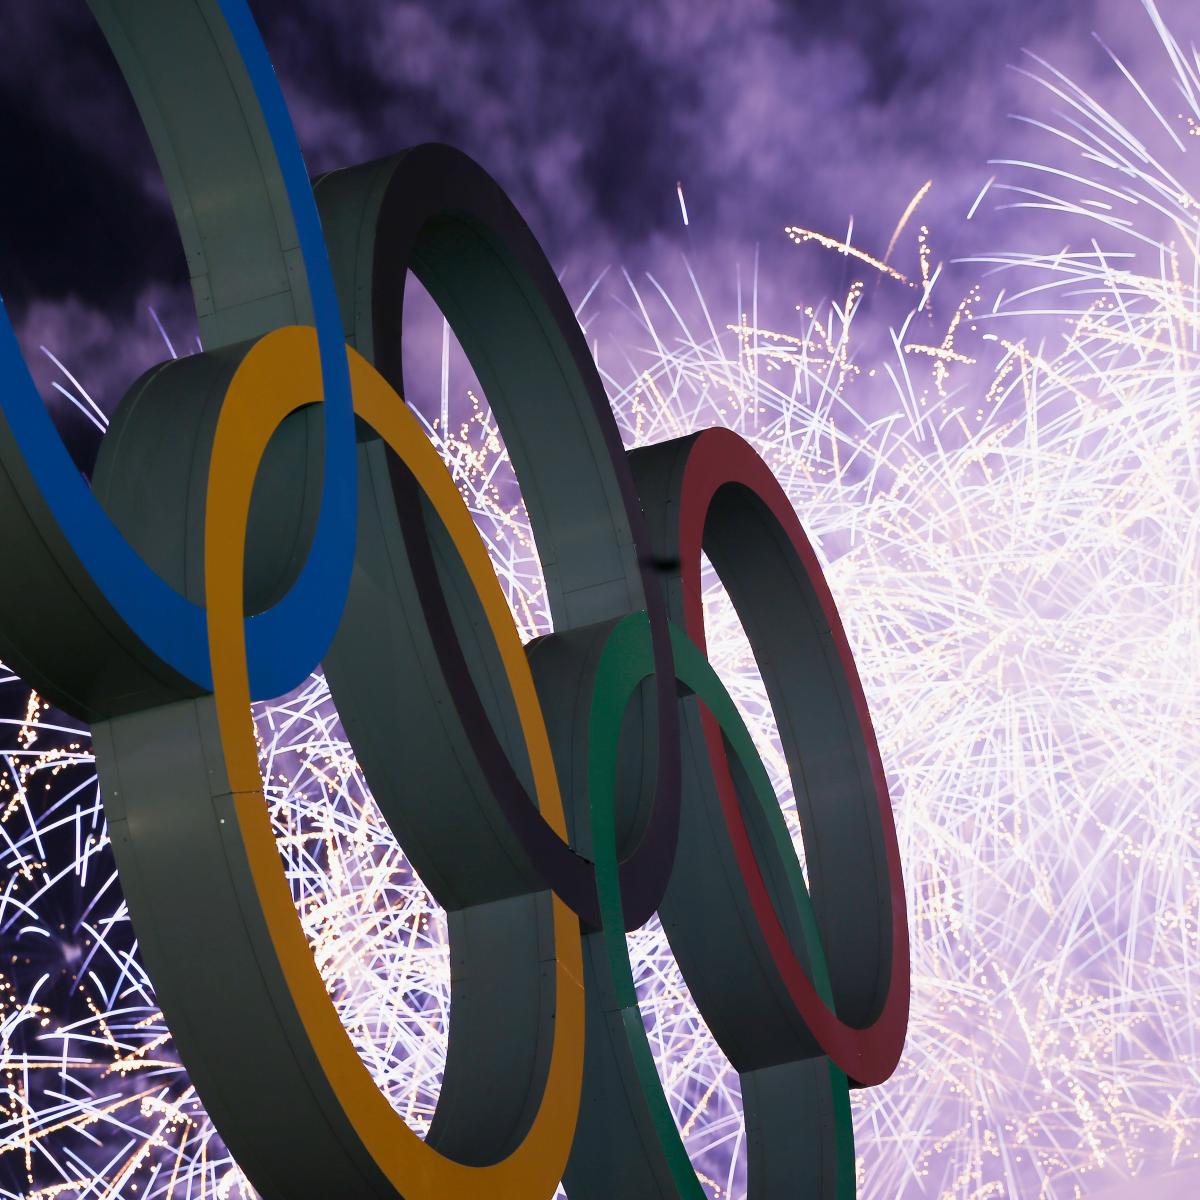 Olympics Closing Ceremony 2014: Primetime Viewing Guide for Final Event ...